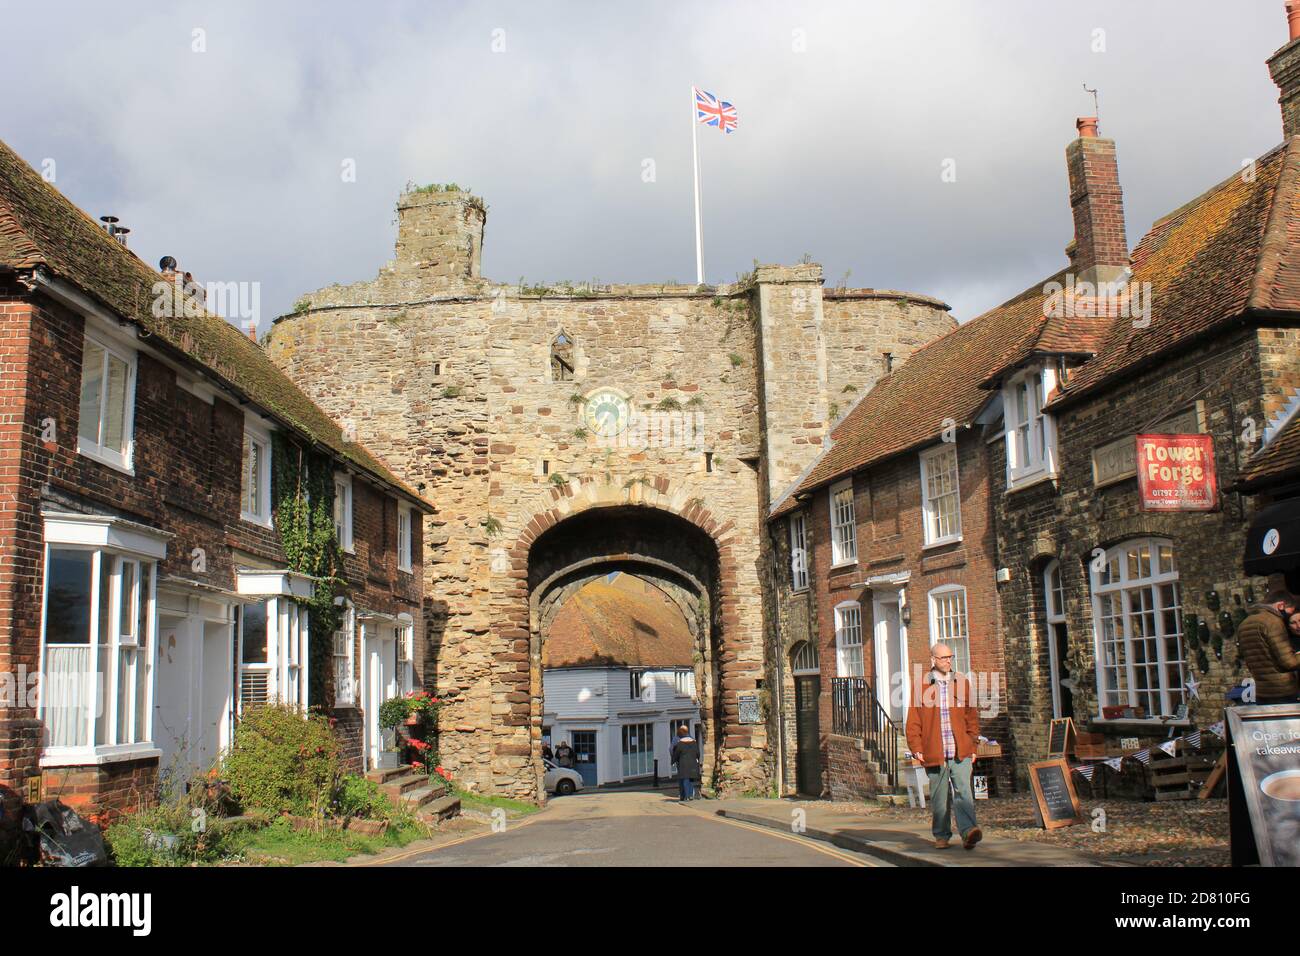 The Landgate entrance to Rye in East Sussex, Built in 1300's as part of cinque ports defense wall Stock Photo